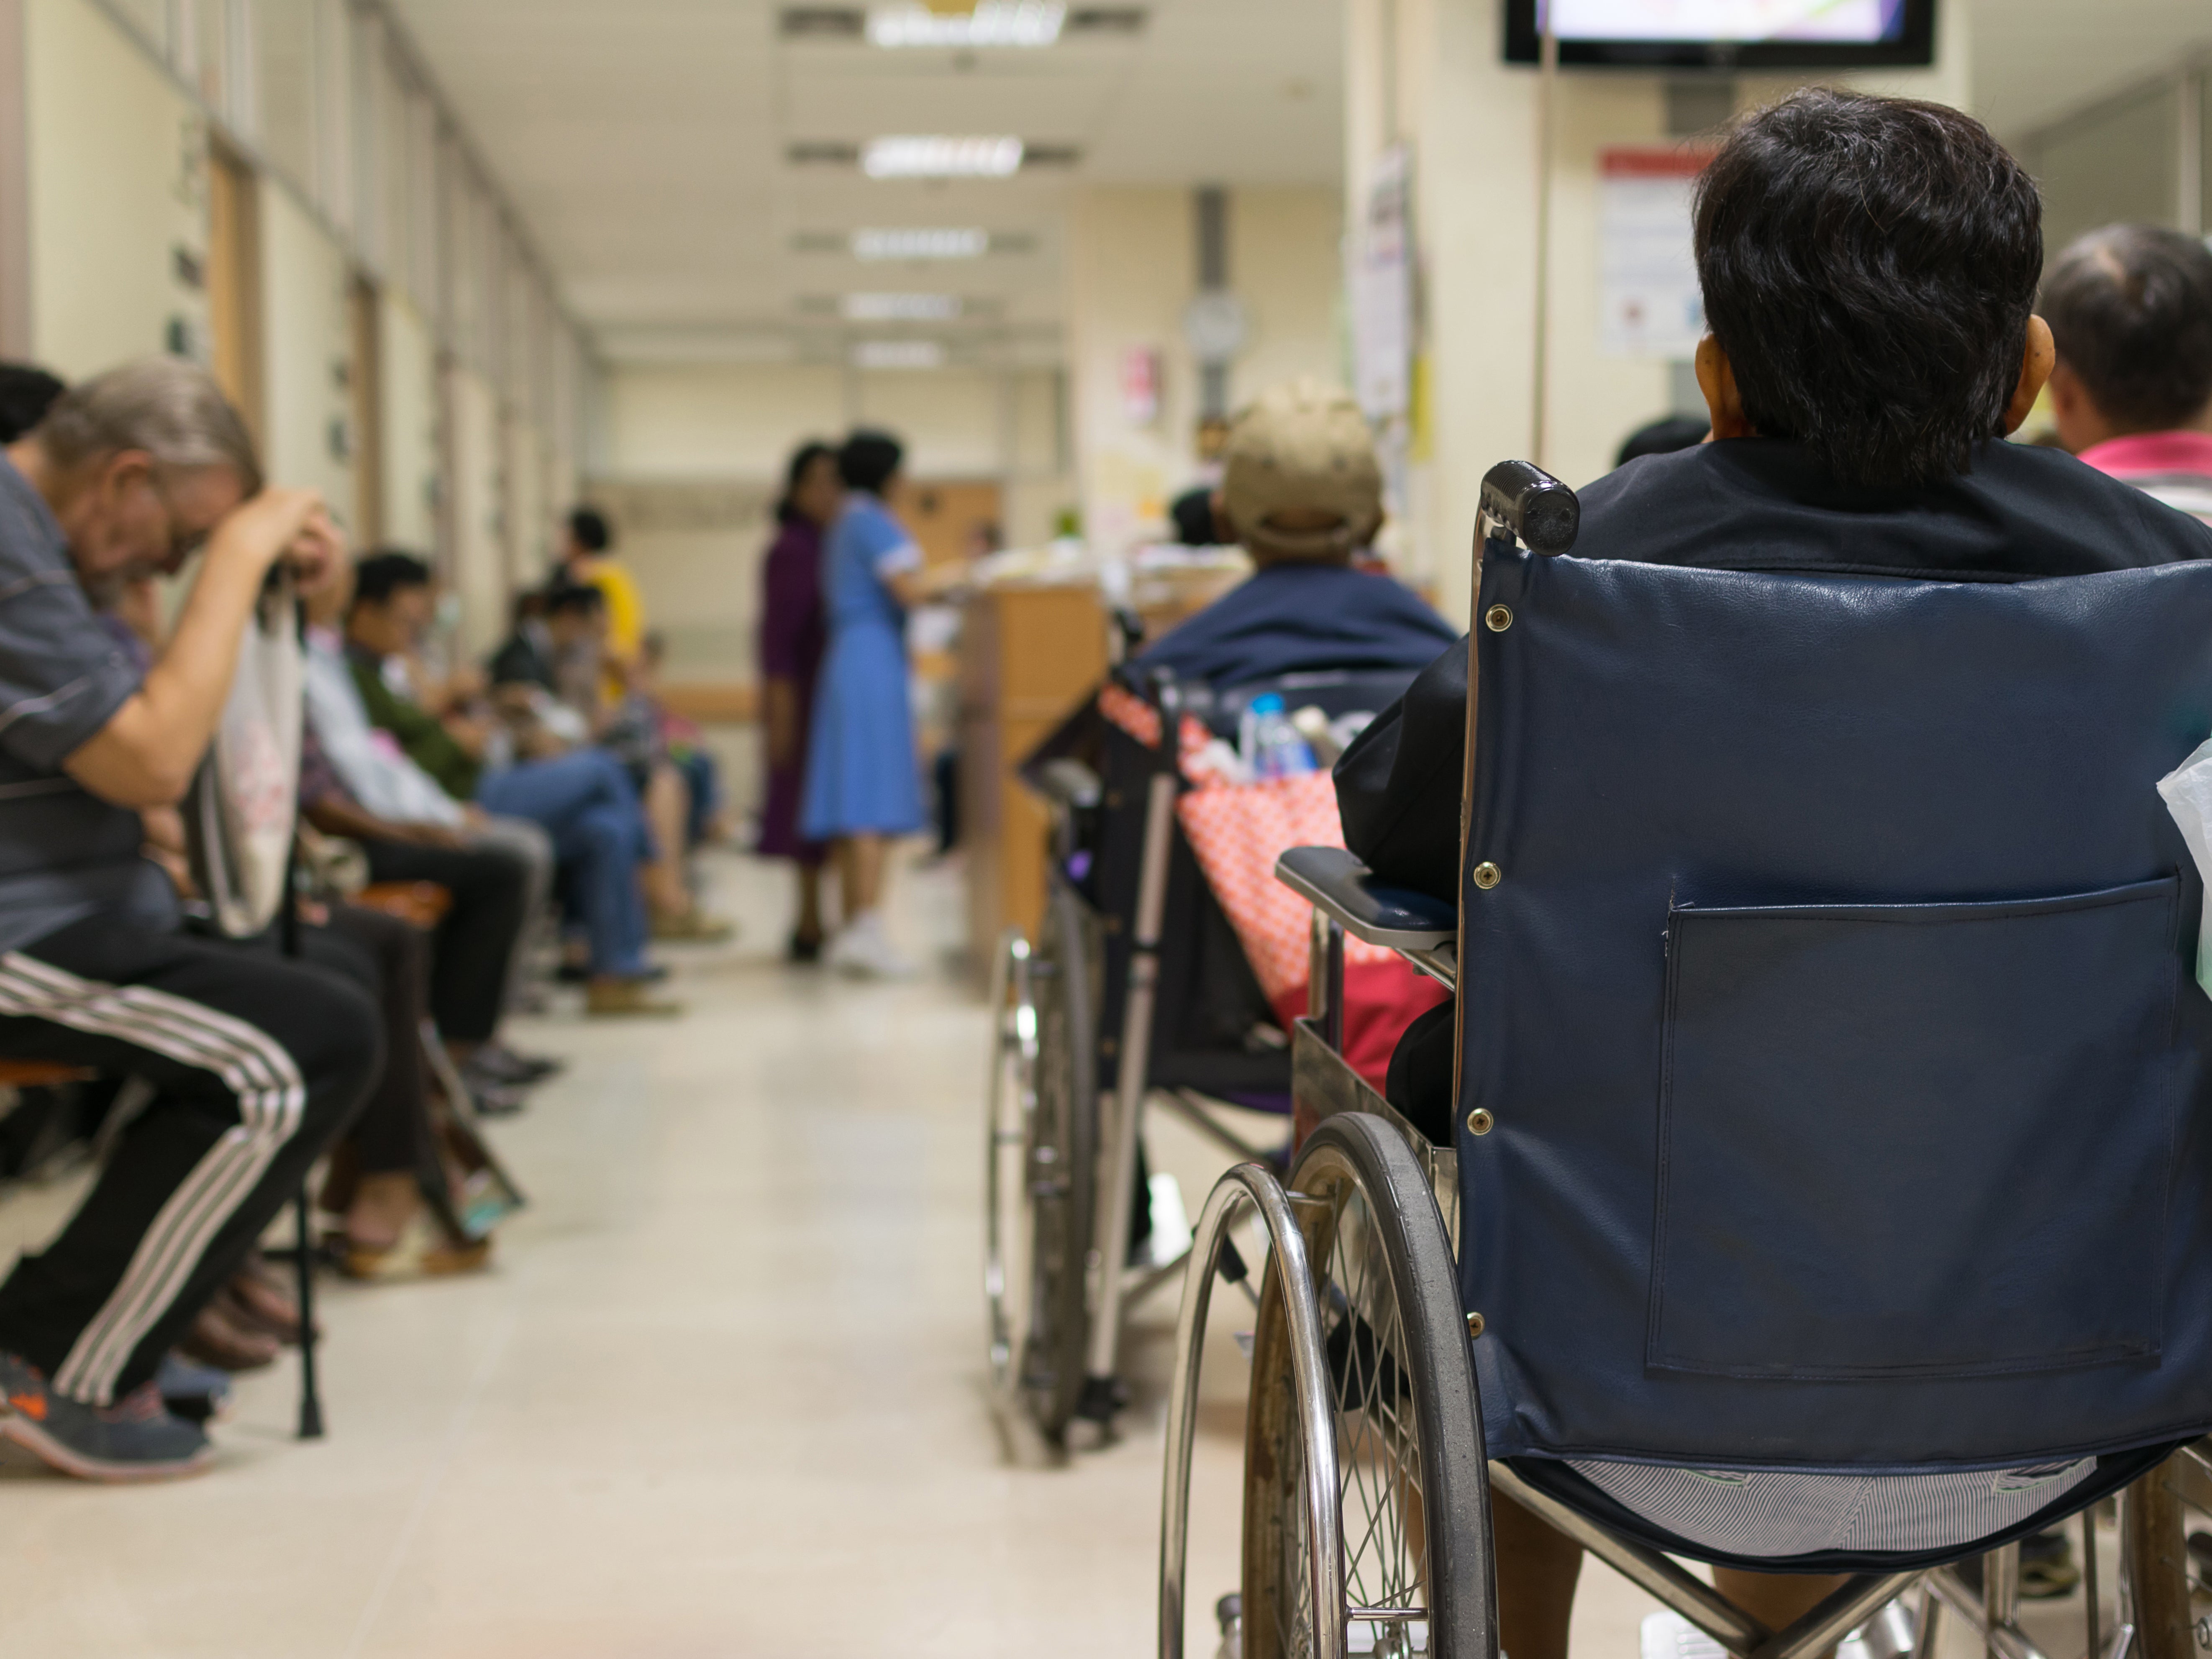 More than 24,100 people had to wait 12+ hours to be seen in A&E in April